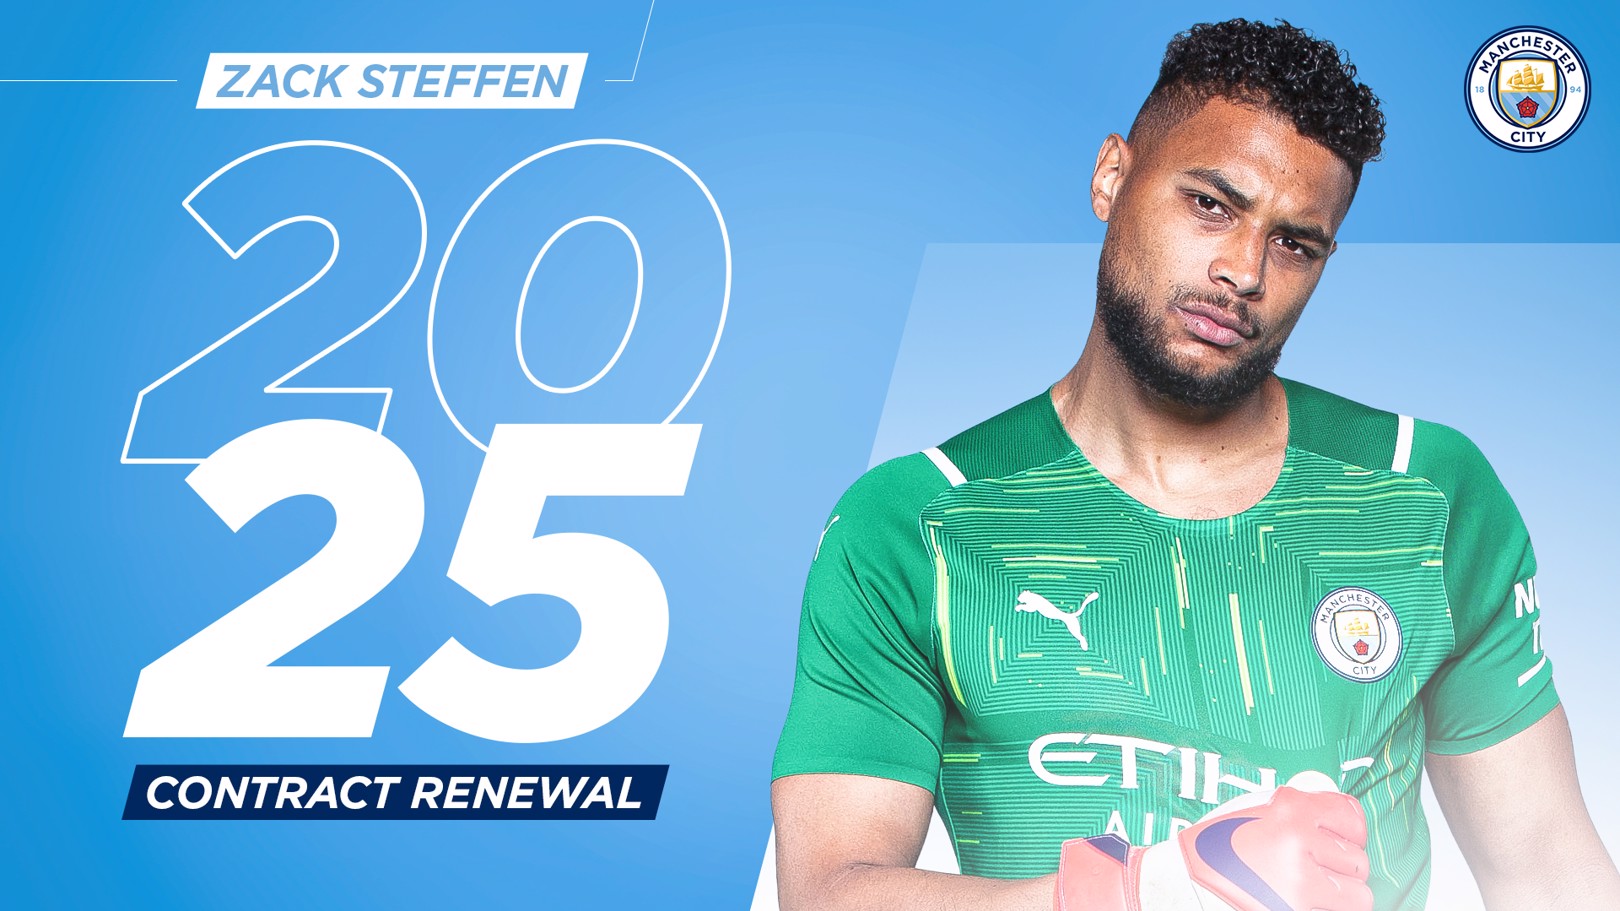 Zack Steffen Signs New Manchester City Contract